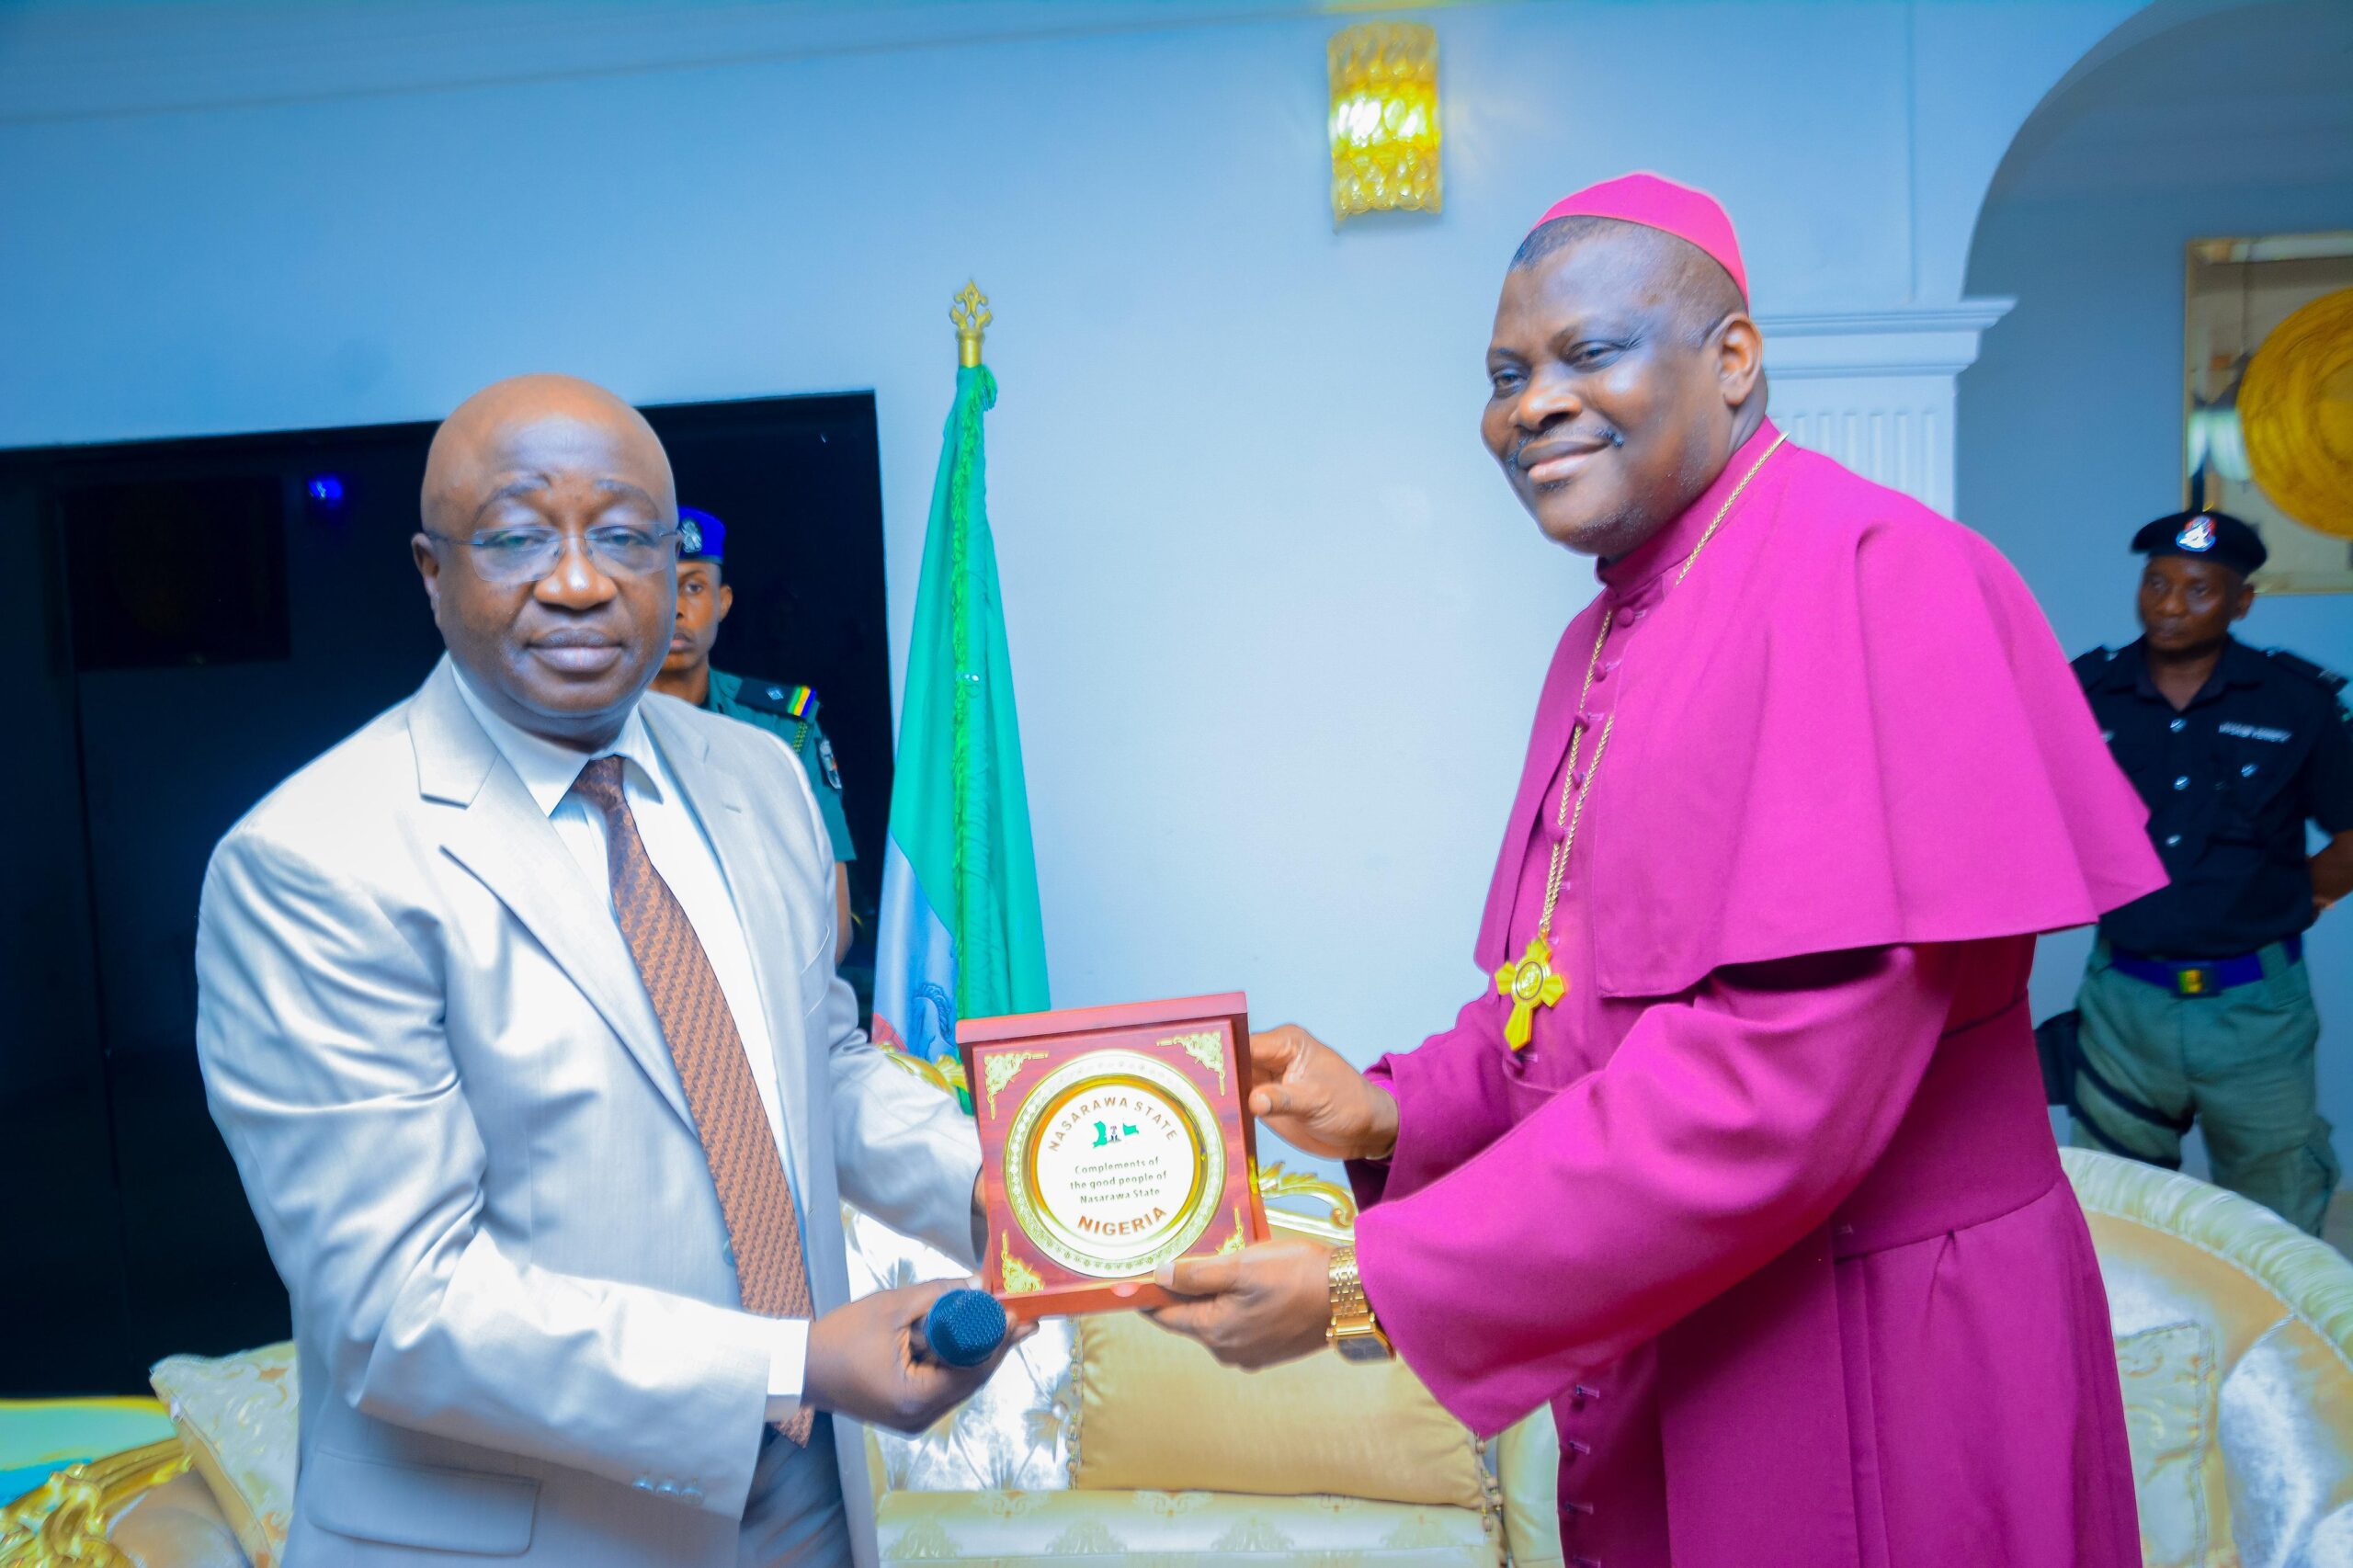 “We are Not Going to Compromise Standard” – NCPC Boss, Bishop Adegbite